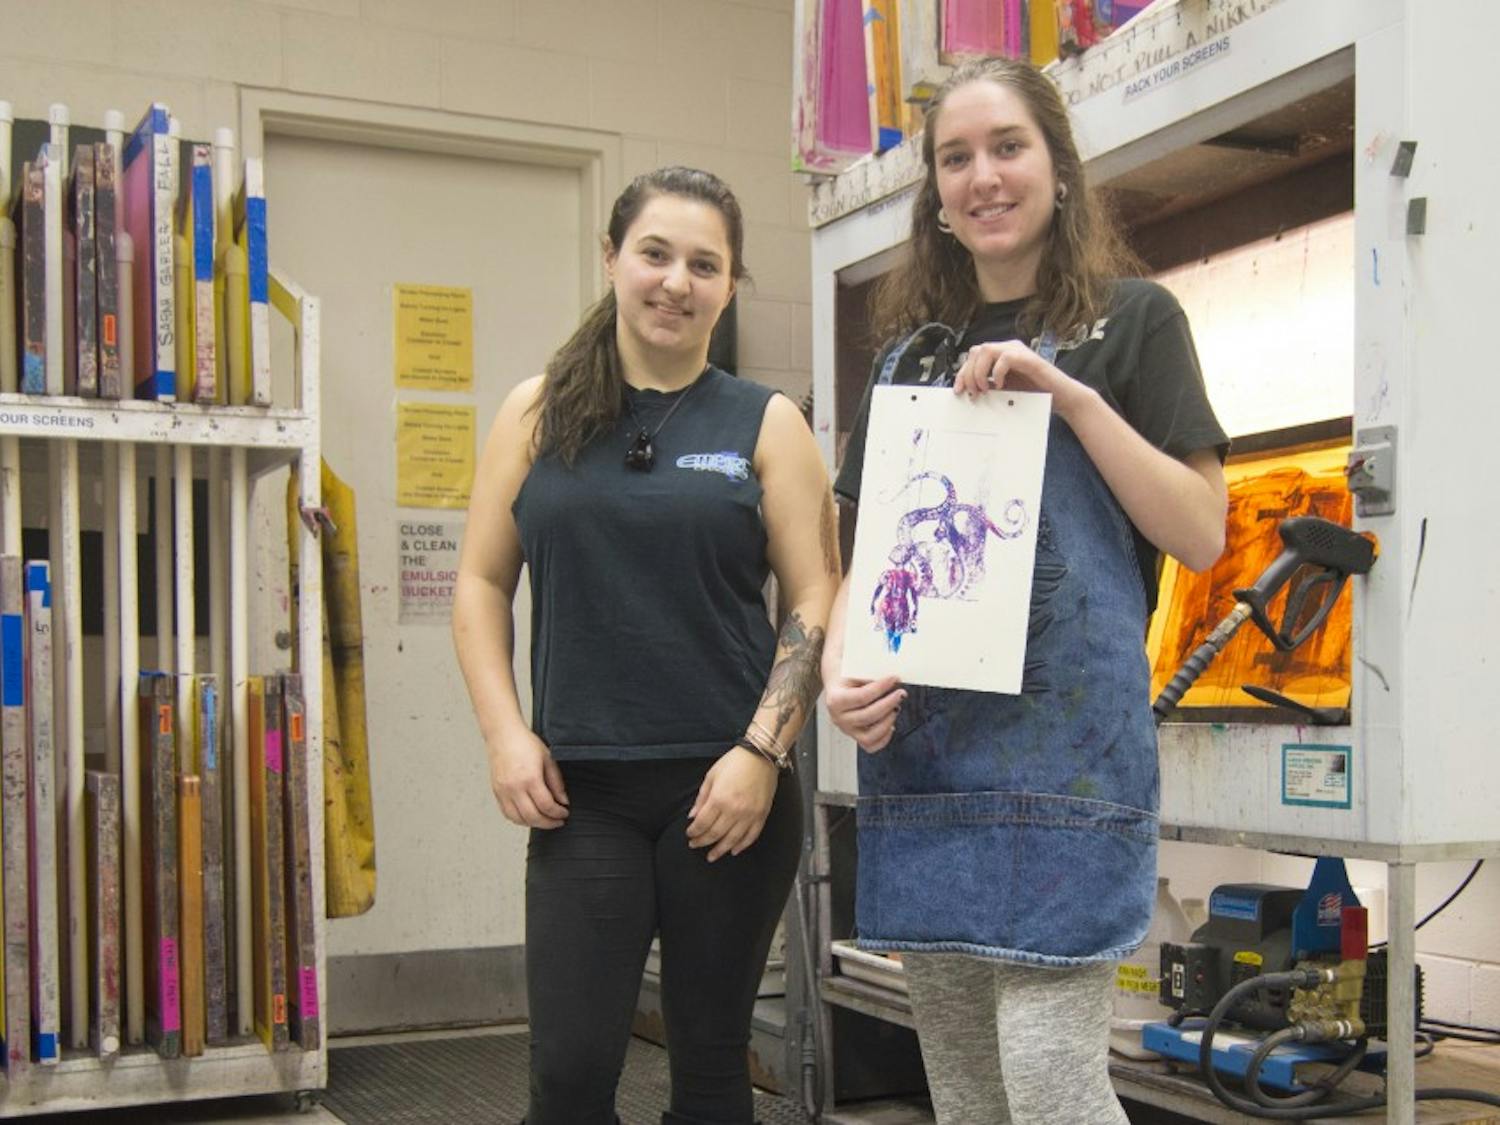 Annive Farrand, a junior studio art major, and&nbsp;Sierra Thurston, a senior graphic design major, are working on their final art projects for the semester.&nbsp;